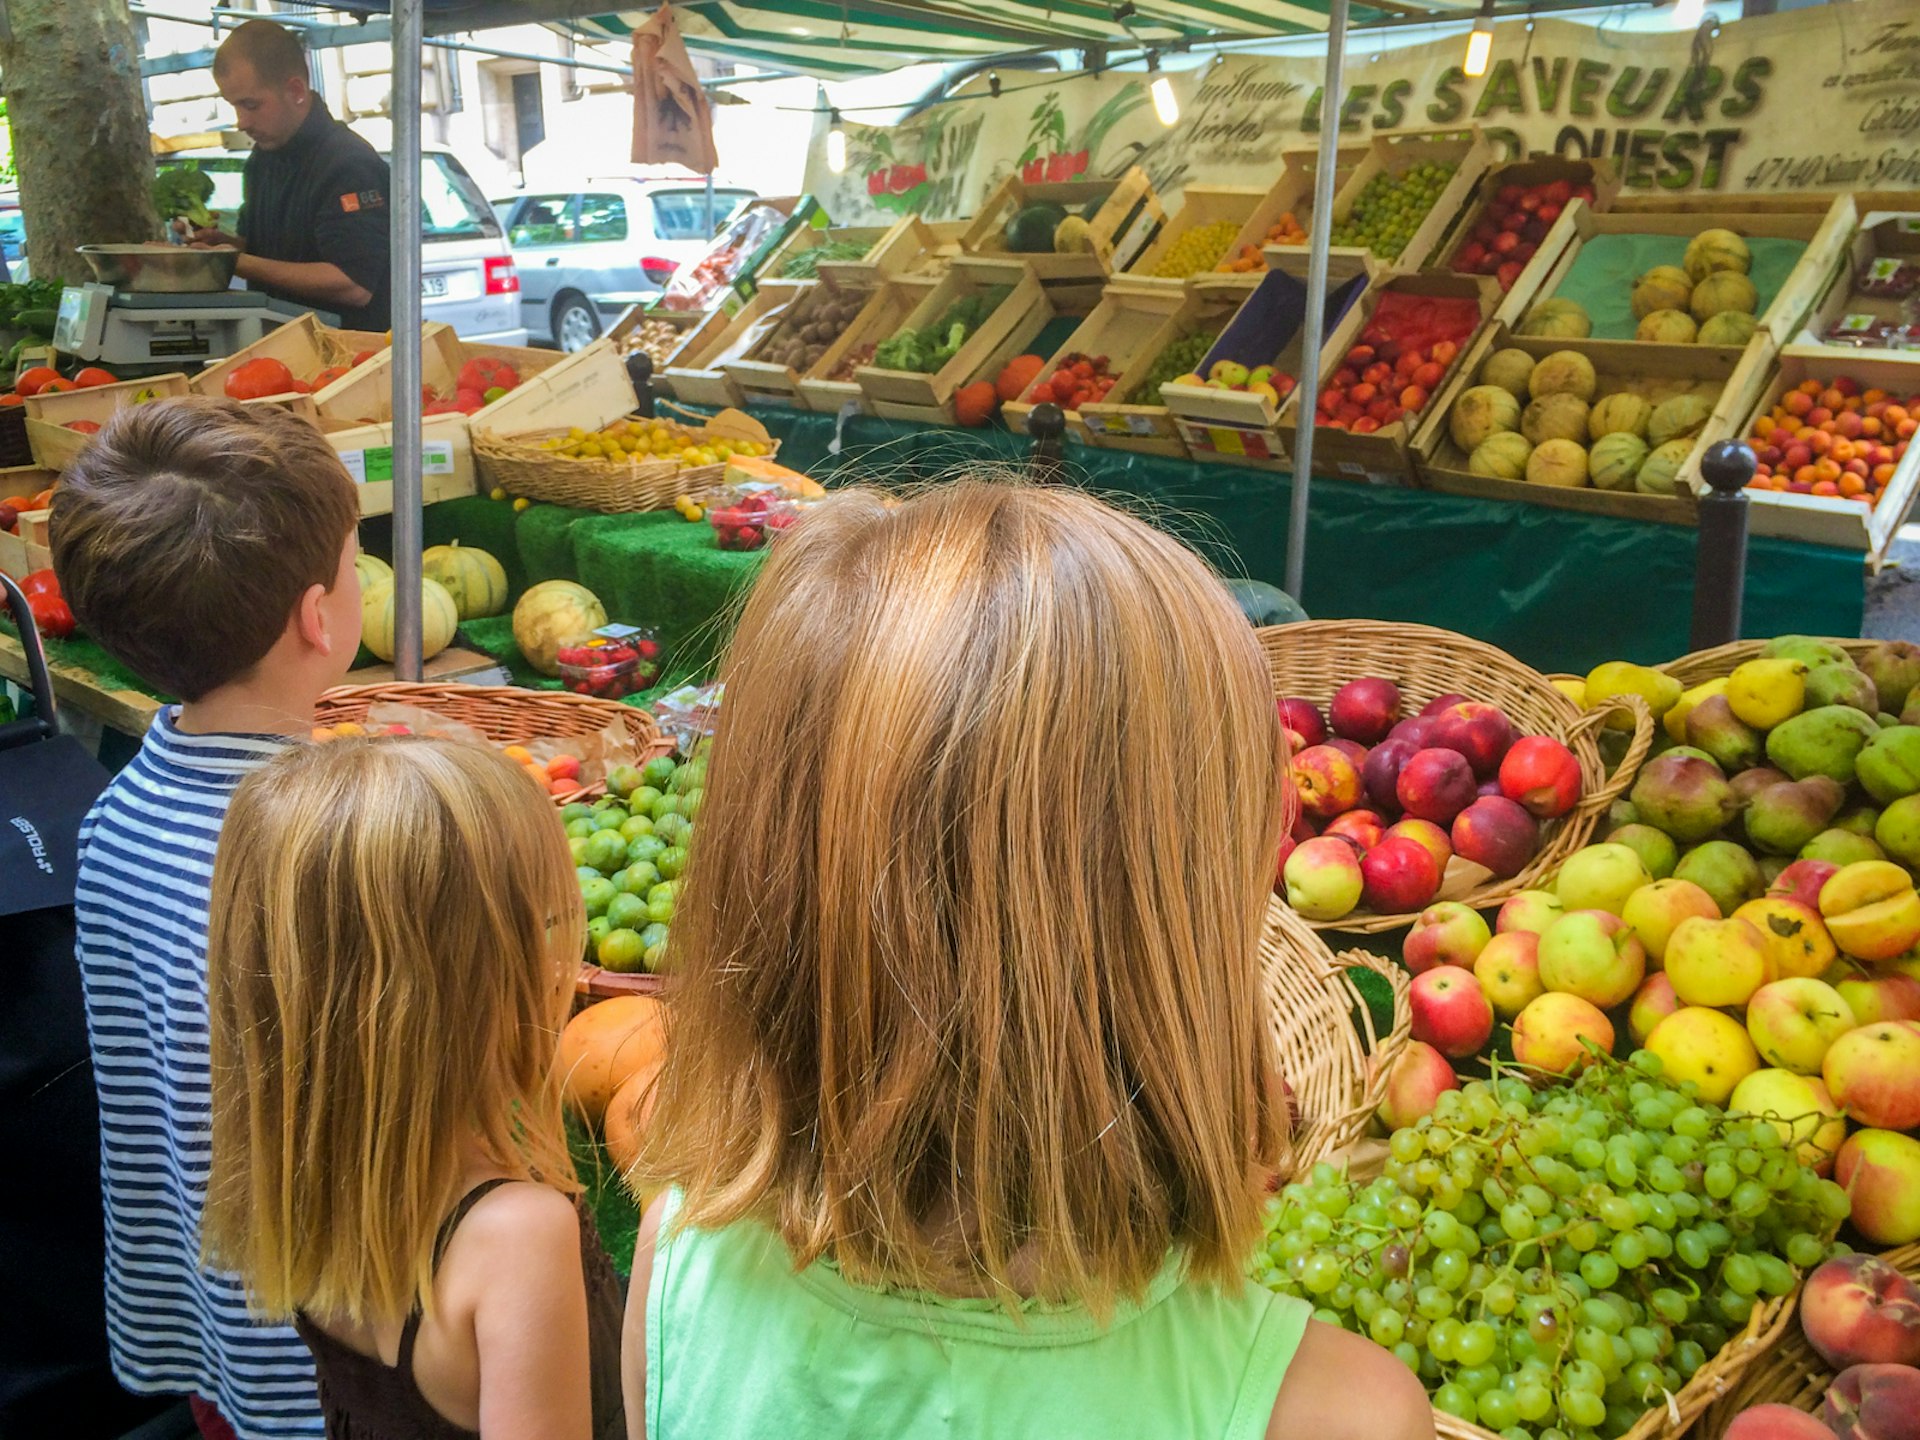 Evelyn and her siblings exploring a colourful food market in Europe